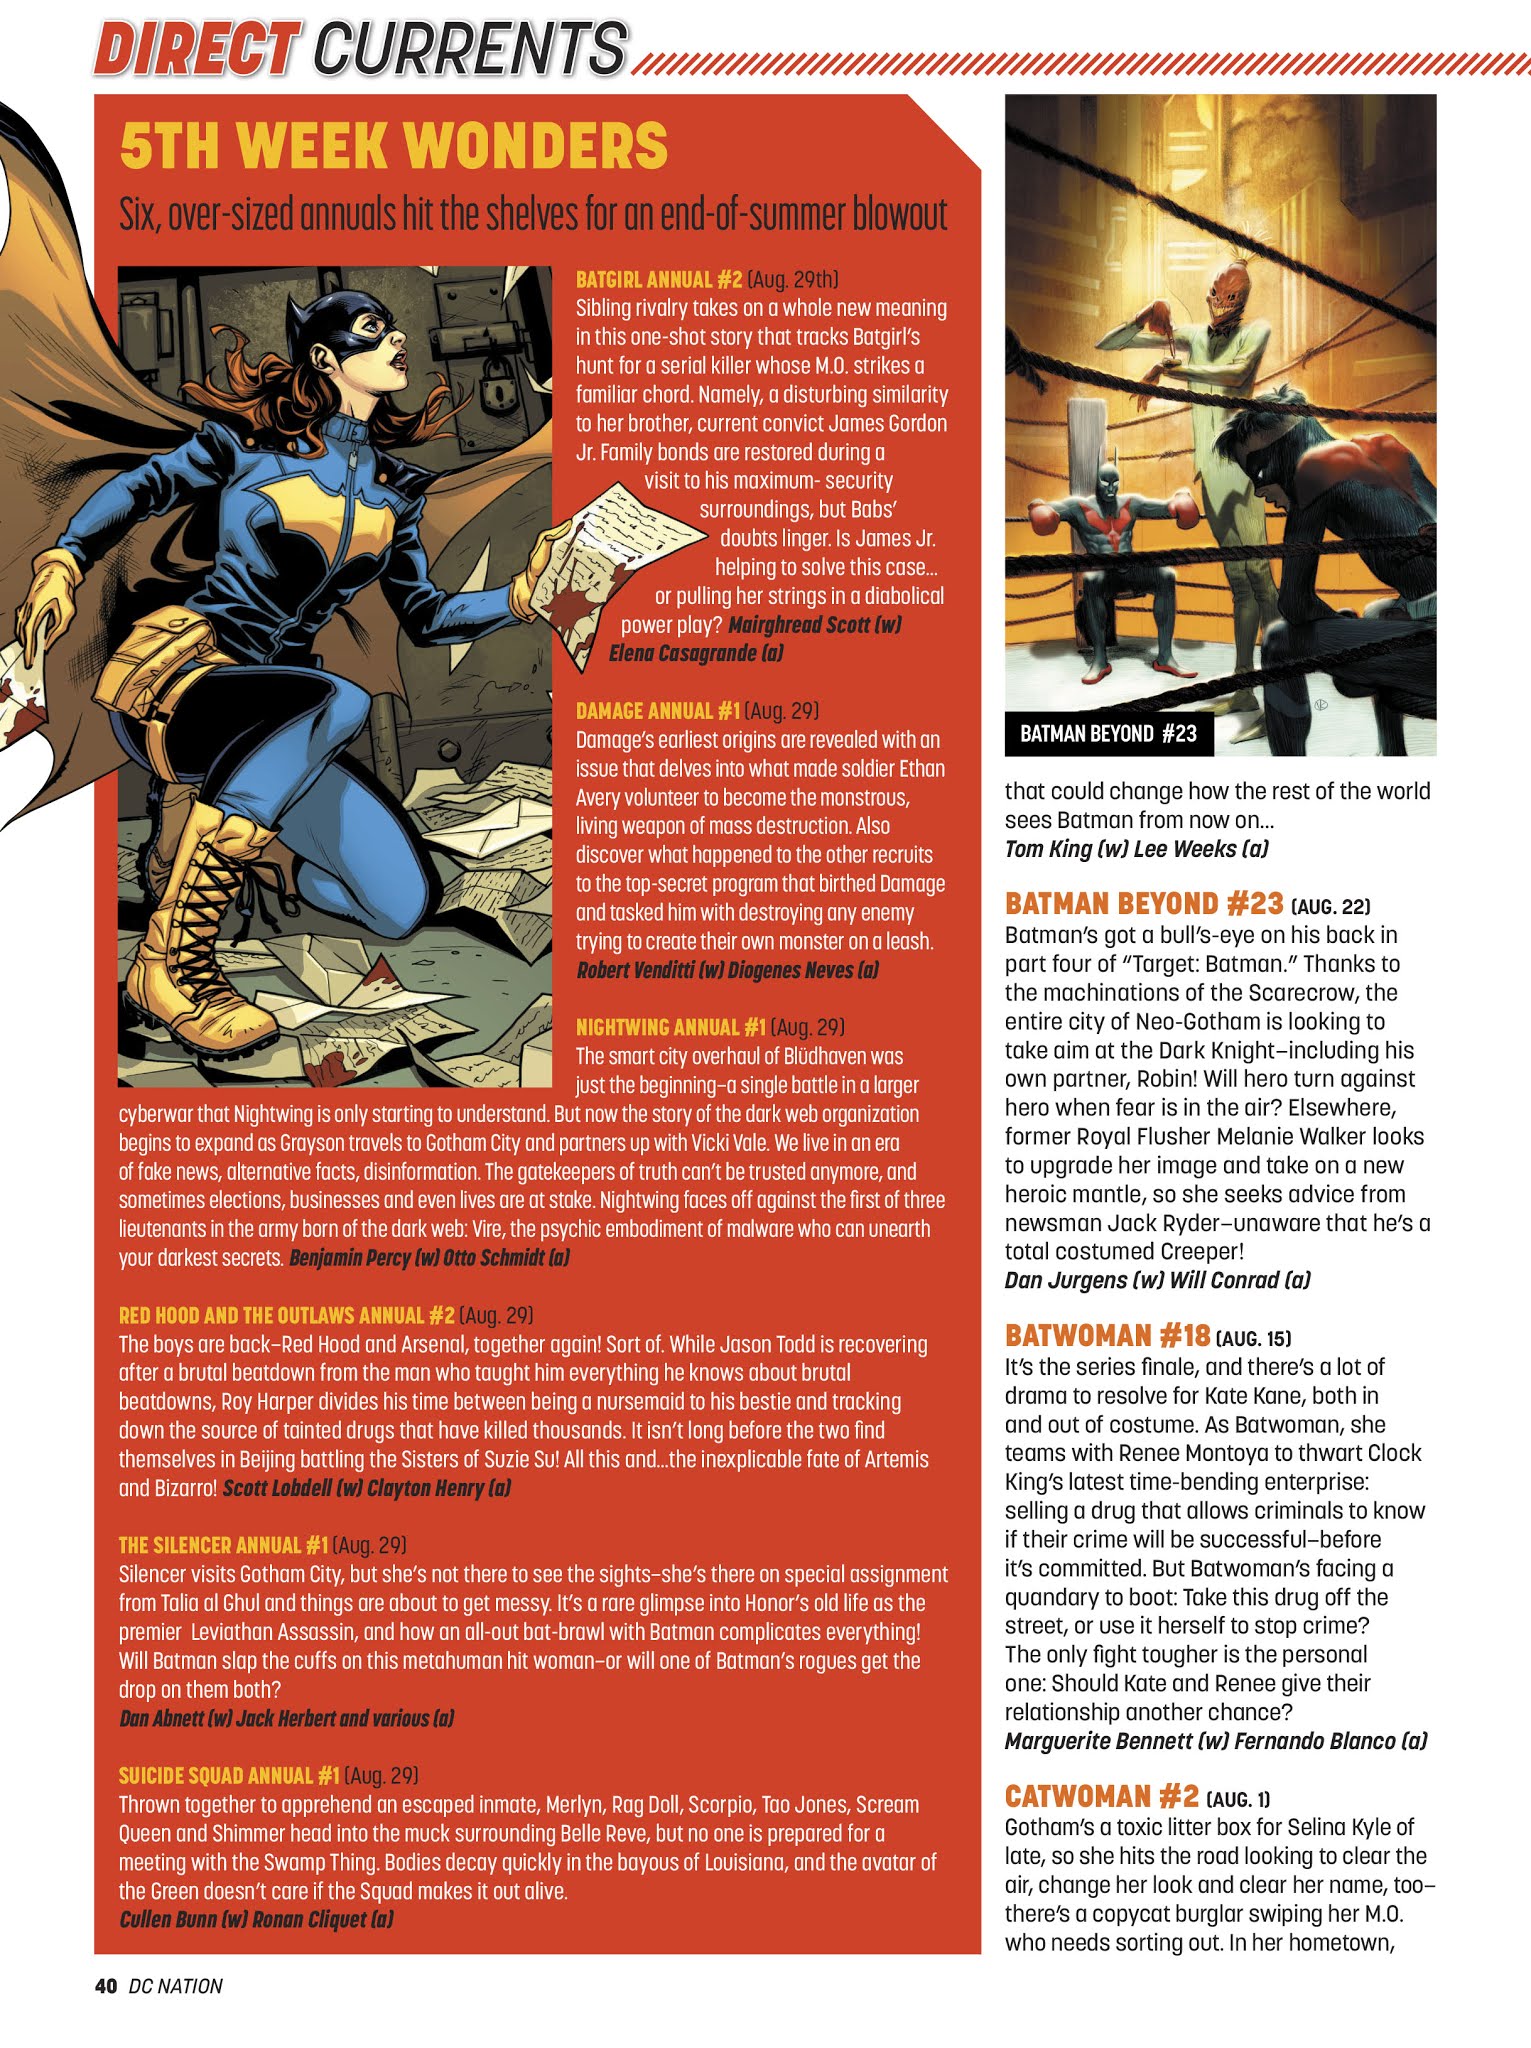 Read online DC Nation comic -  Issue #2 - 36